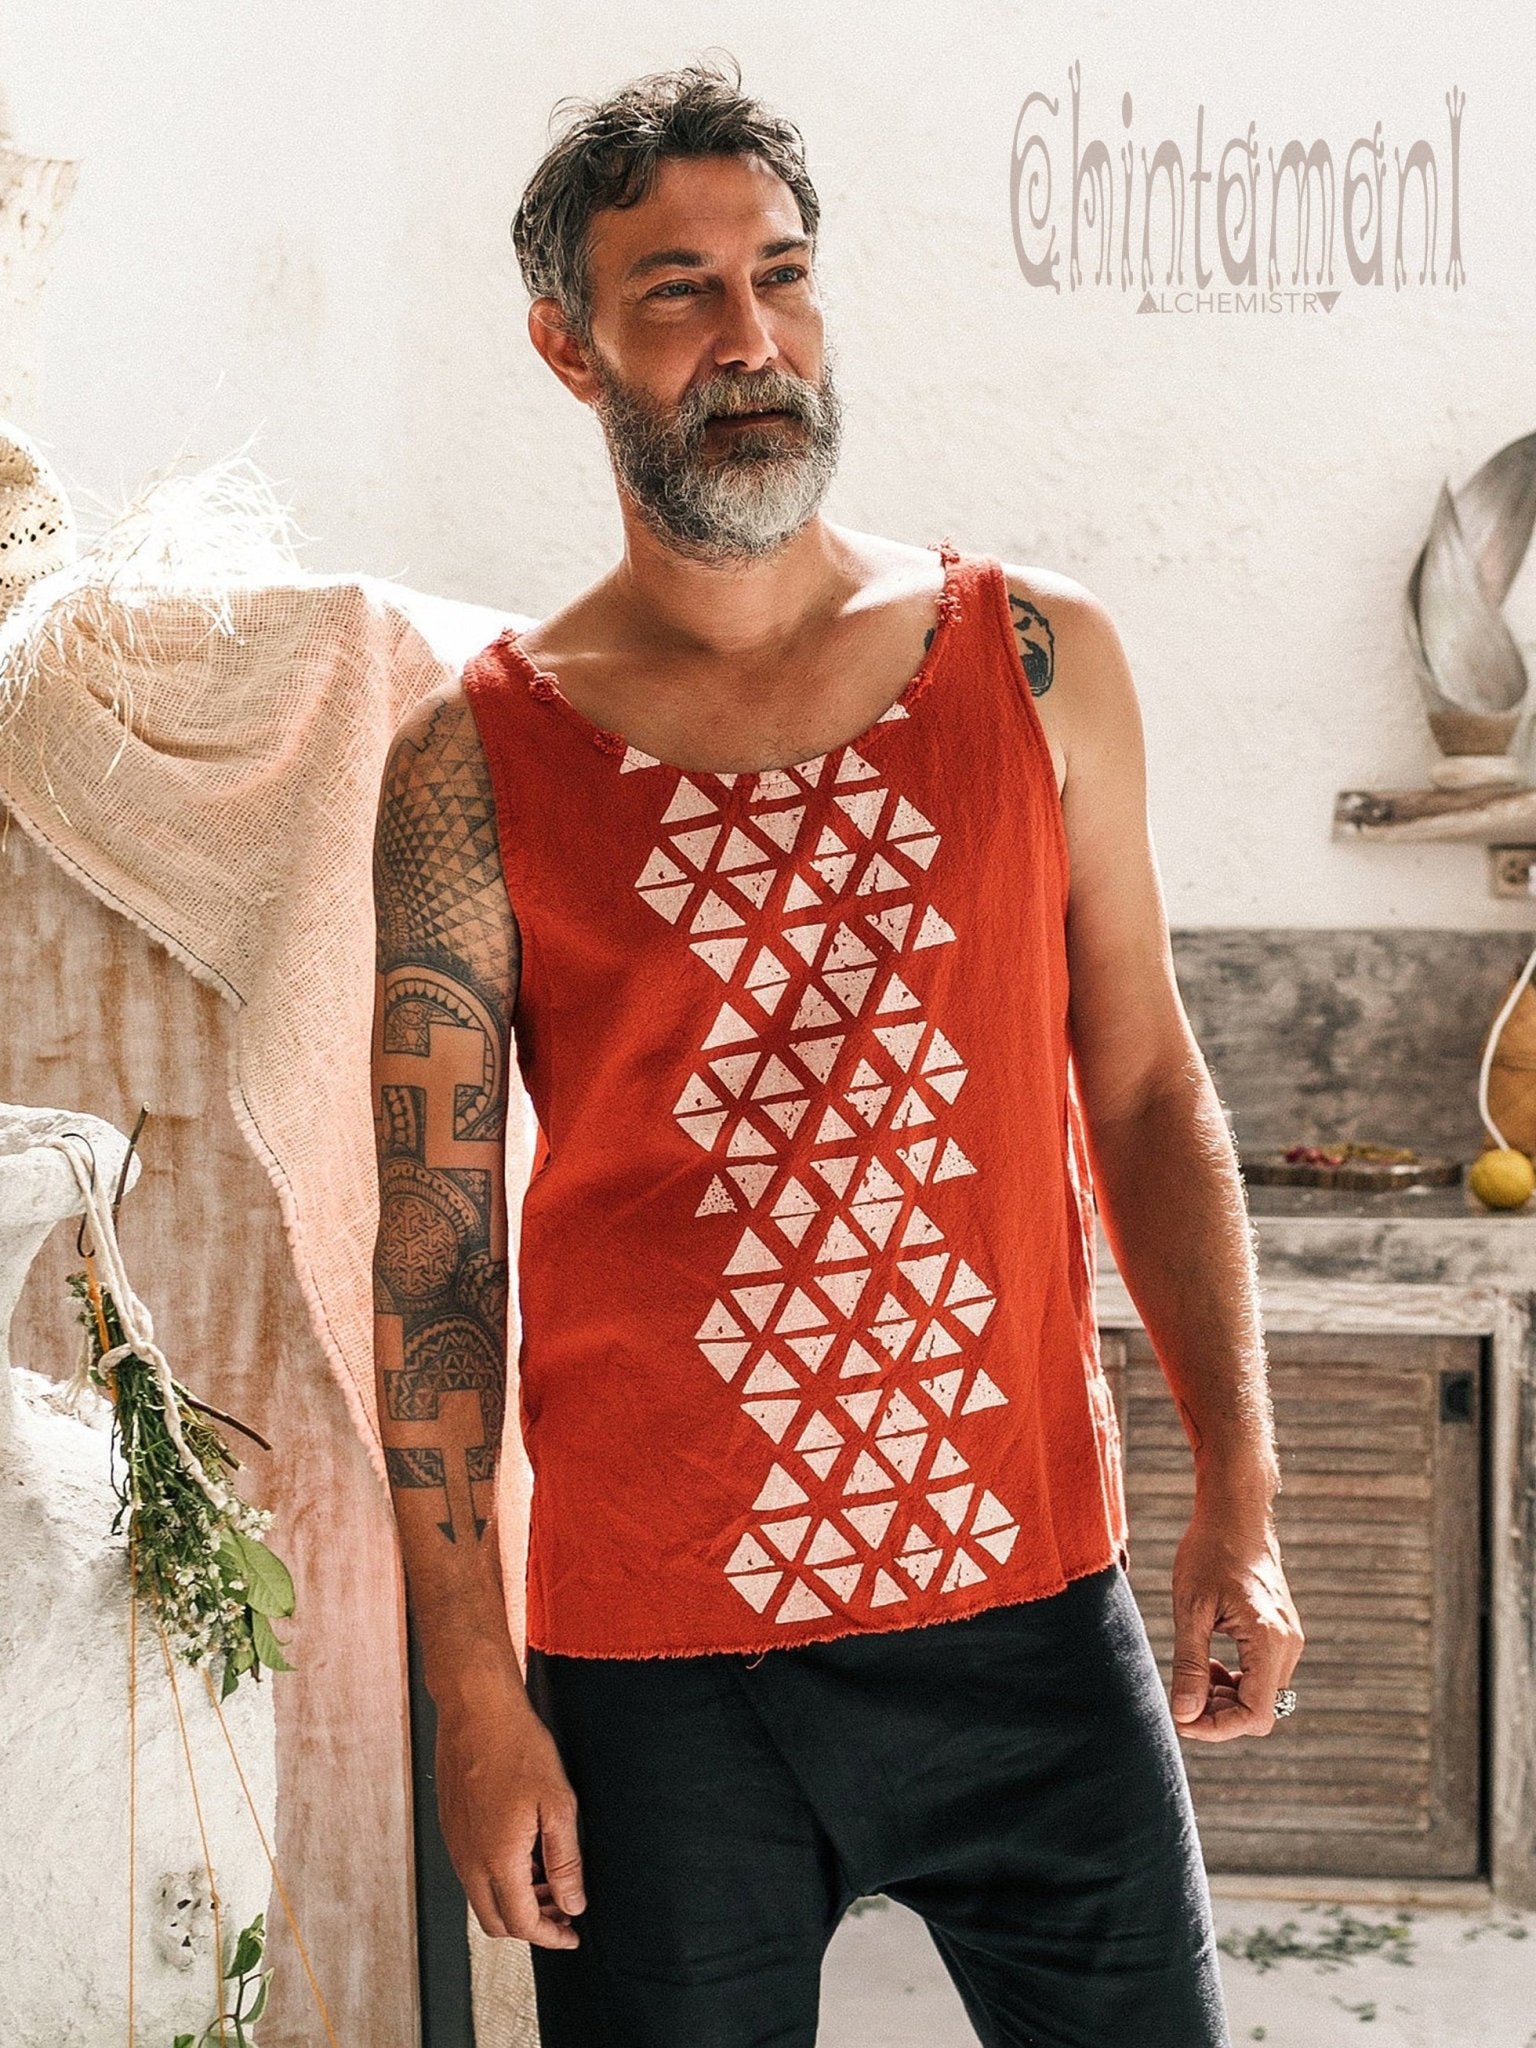 ChintamaniAlchemi Ochre Tank Nomad Men Top for Screen Print Red with – Geometric / Cotton